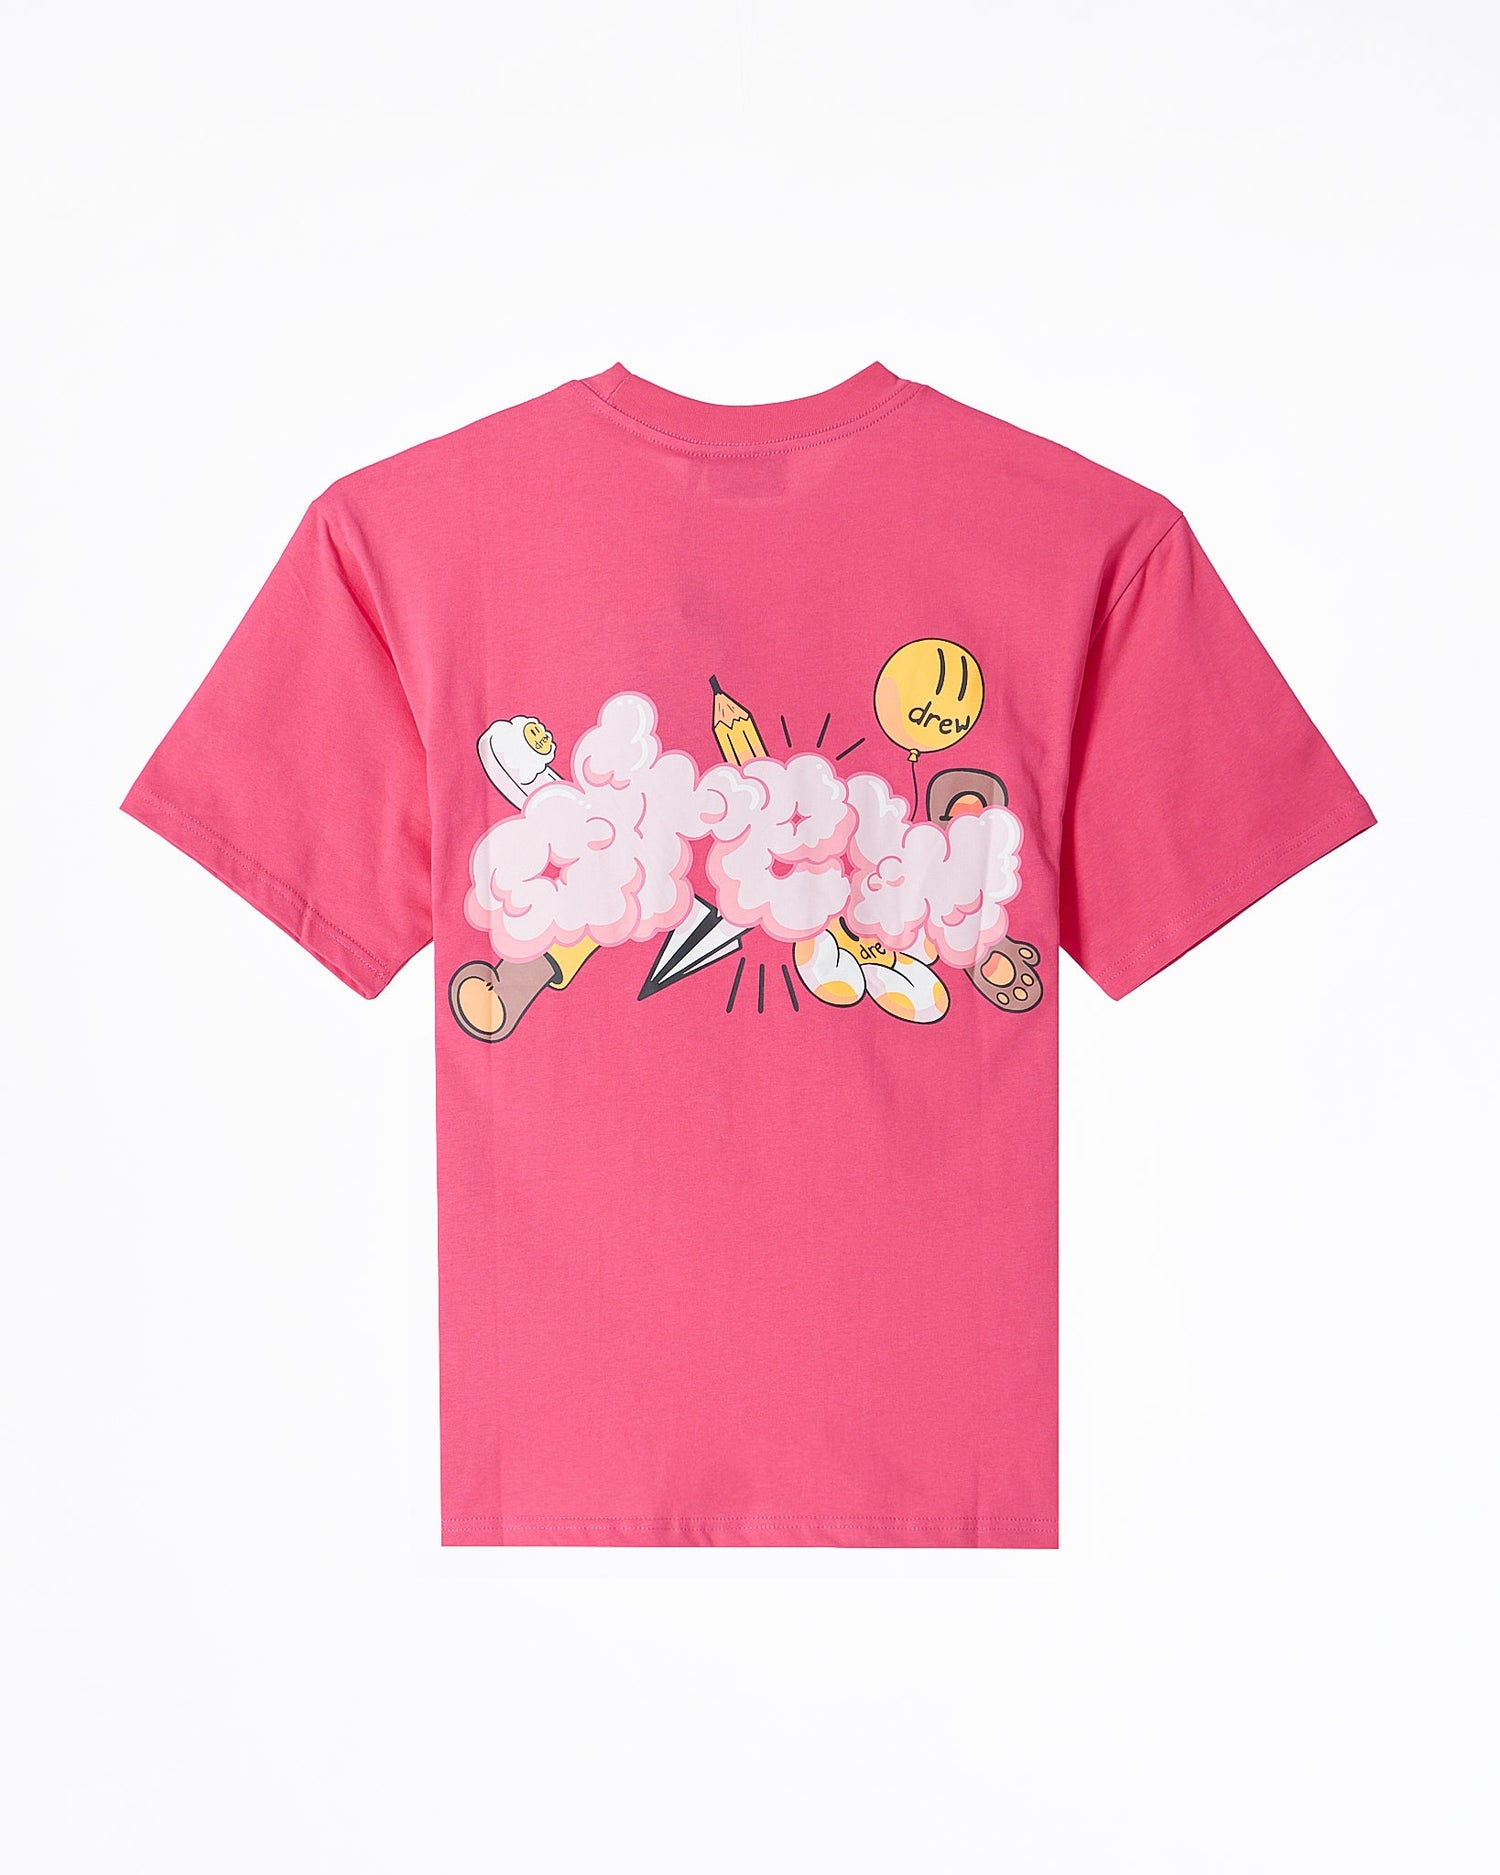 MOI OUTFIT-DRE Cloudy Back Unisex Pink T-Shirt 20.90